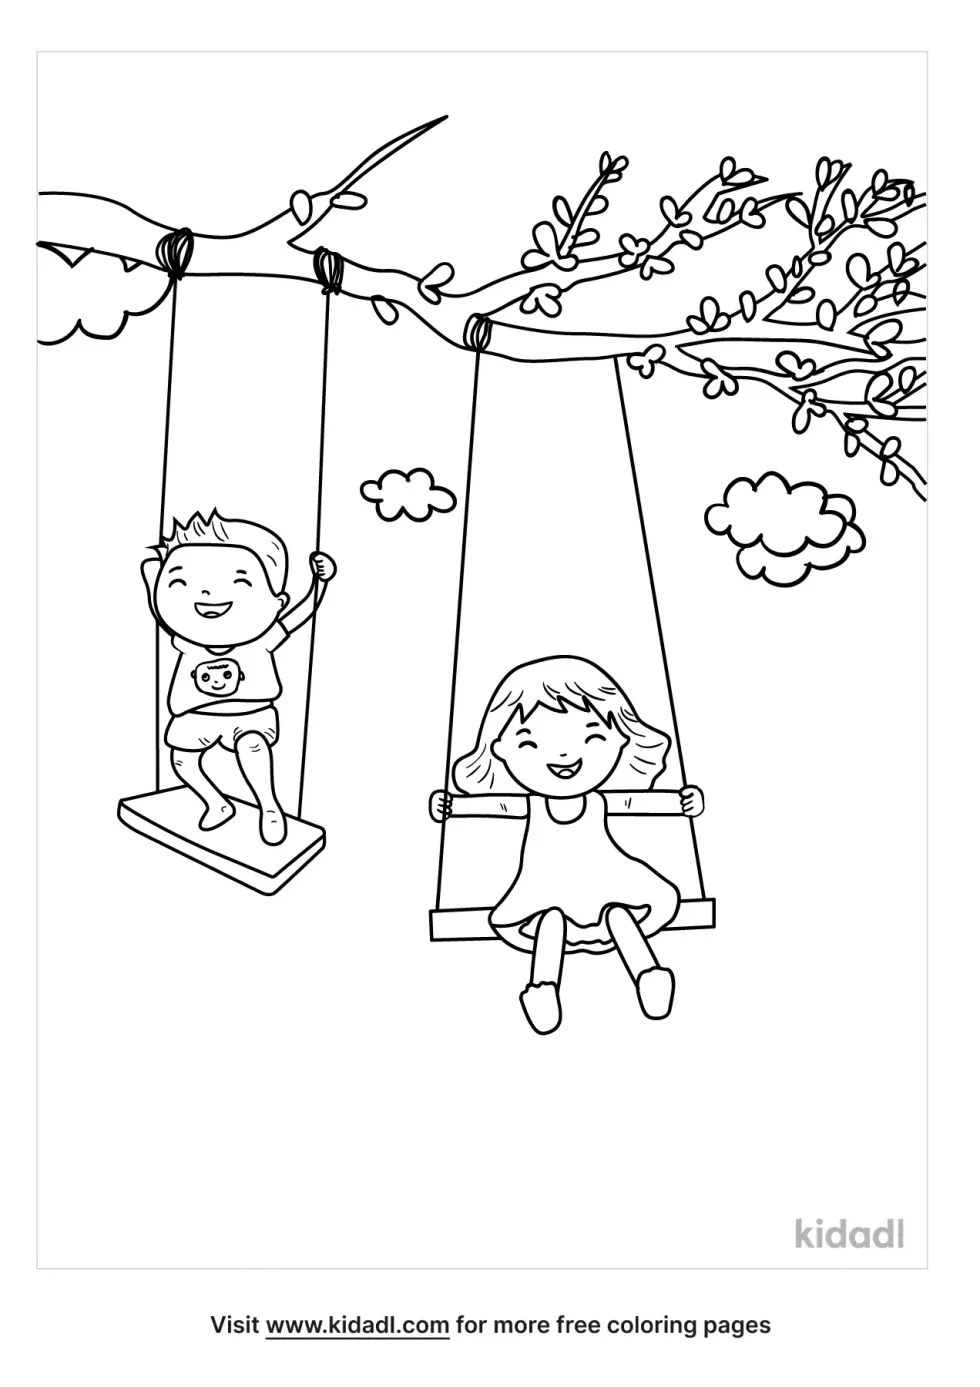 Boy And Girl On A Swing